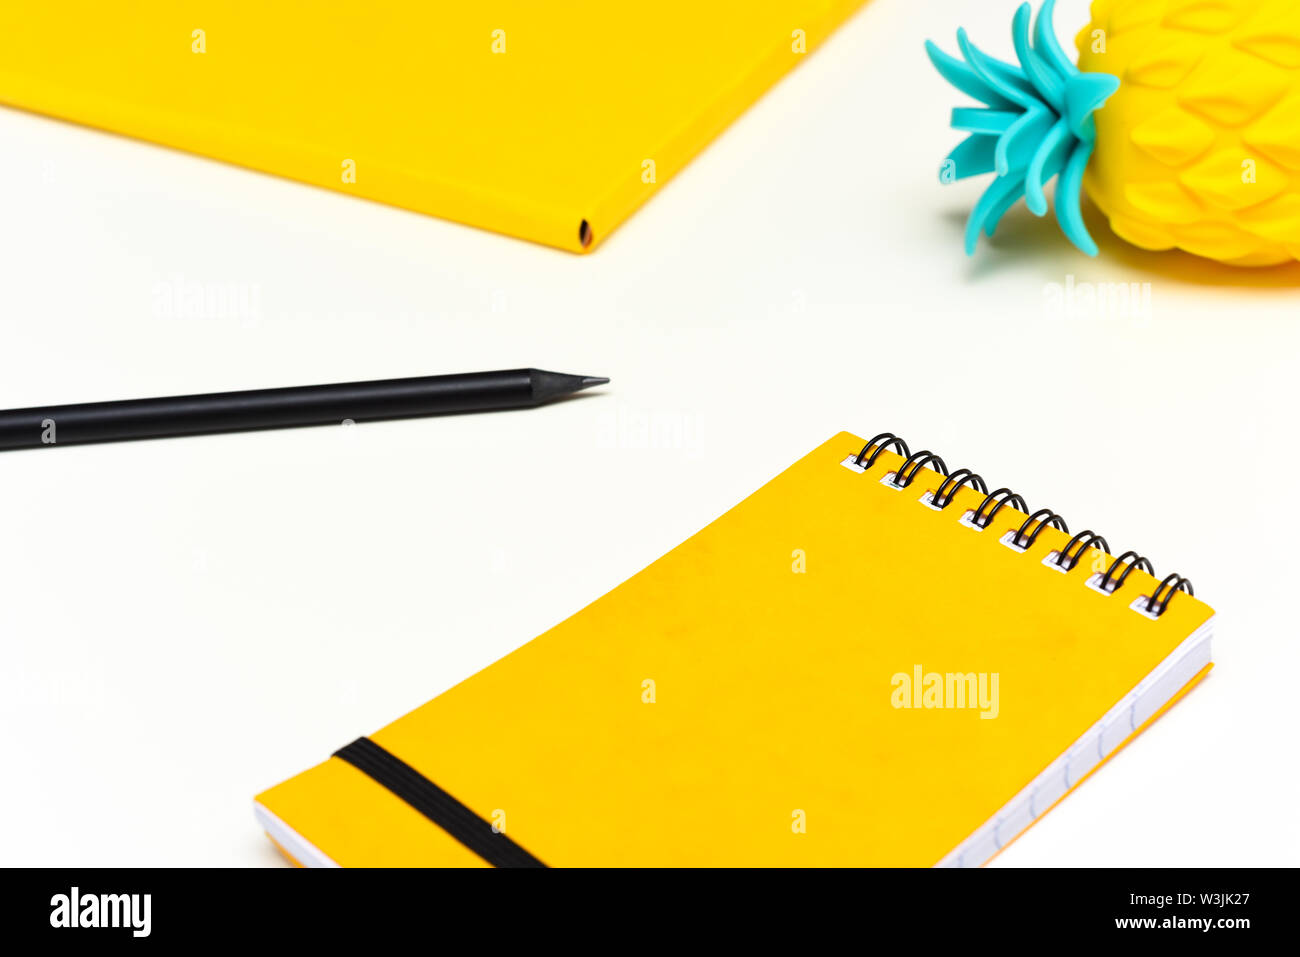 Top view image of office supplies or school accessories, trendy yellow colour objects shot from overhead Stock Photo